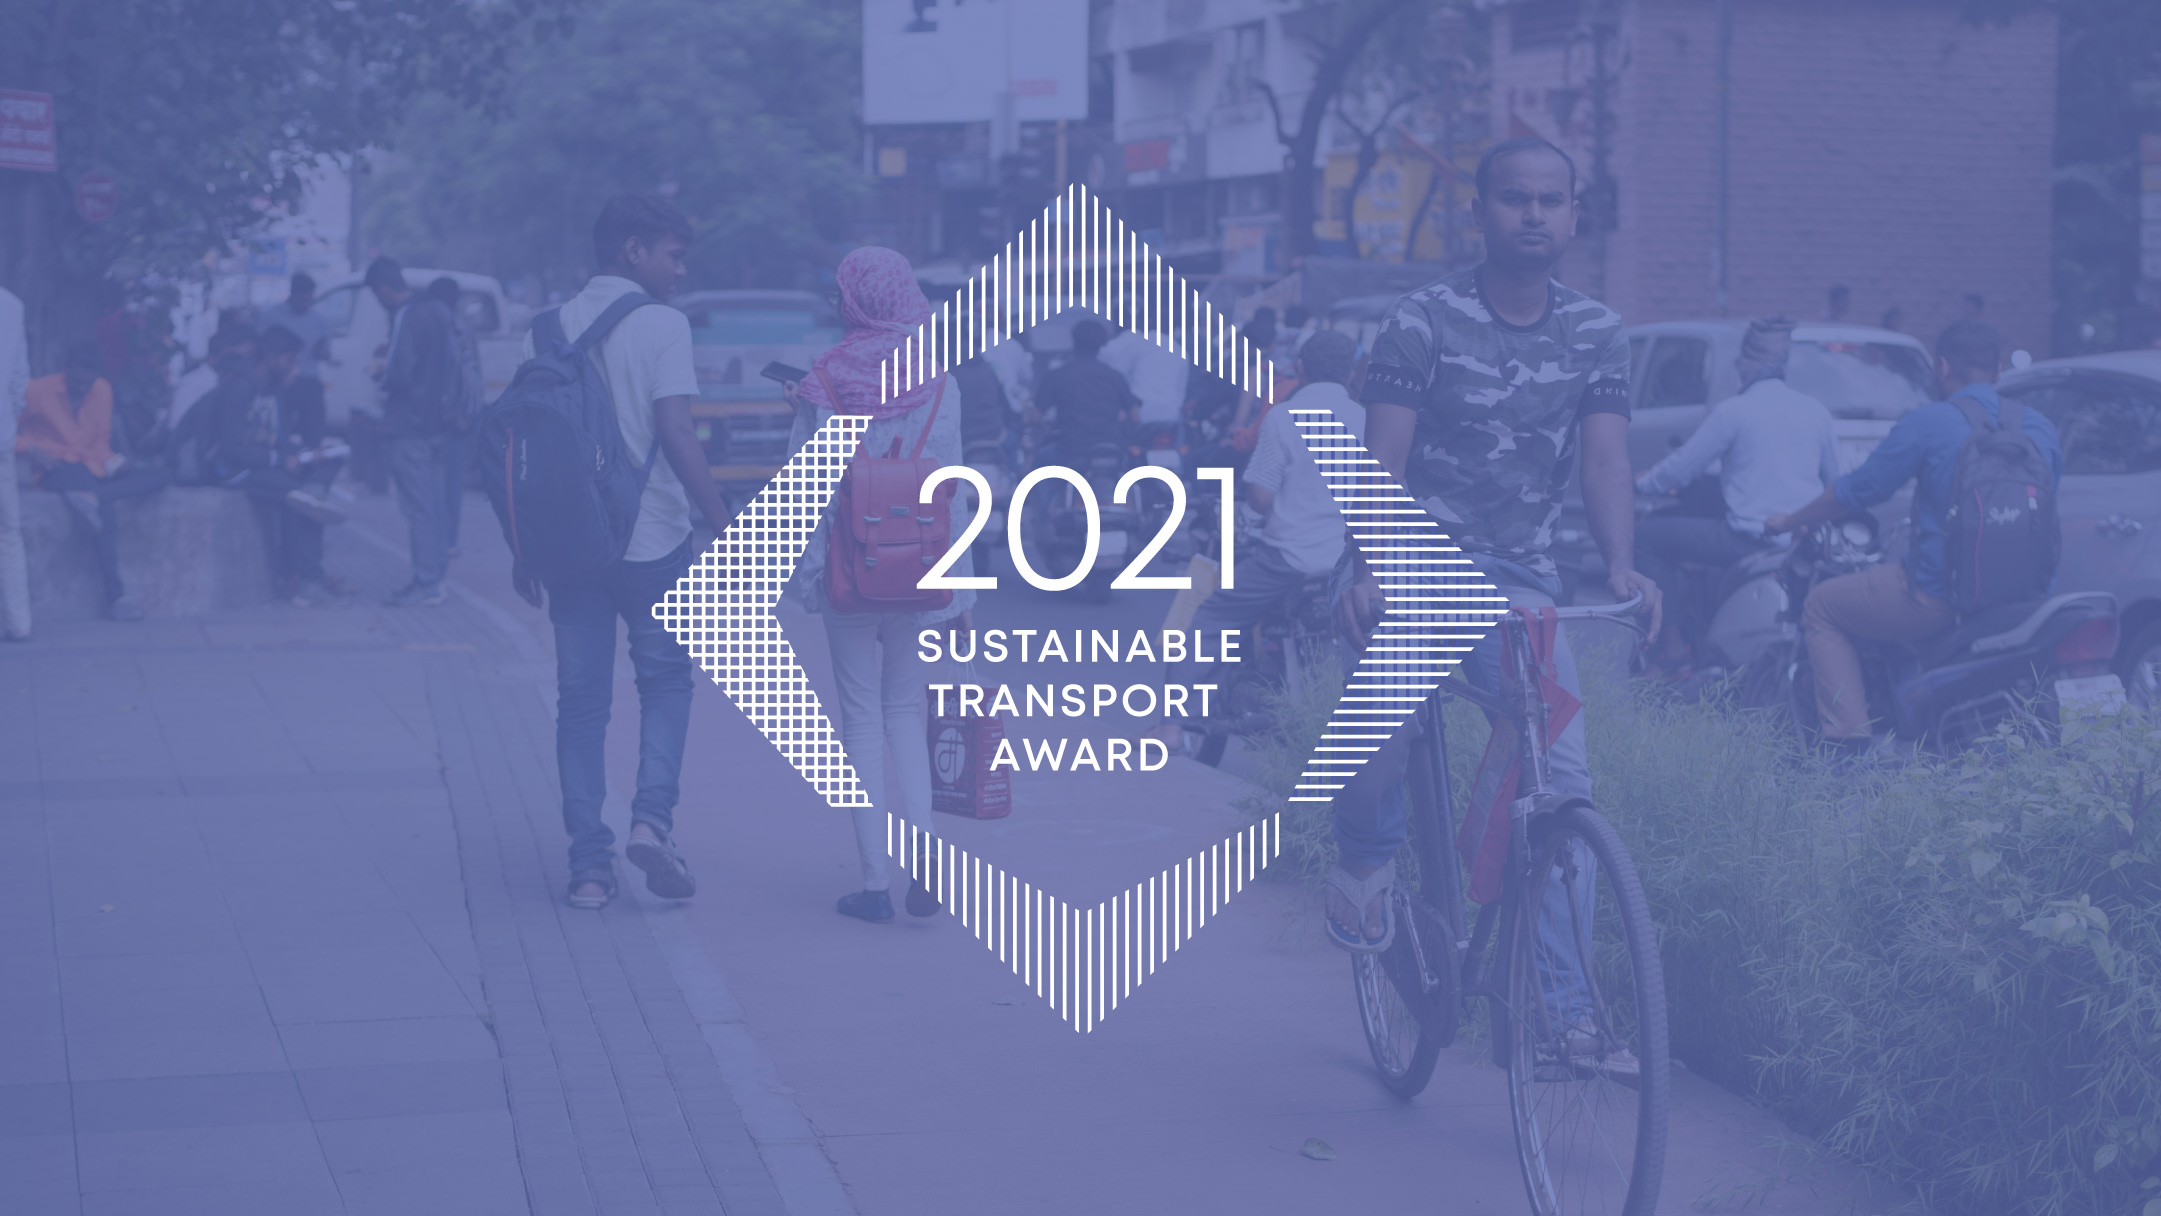 Nominate Your City for the 2021 Sustainable Transport Award